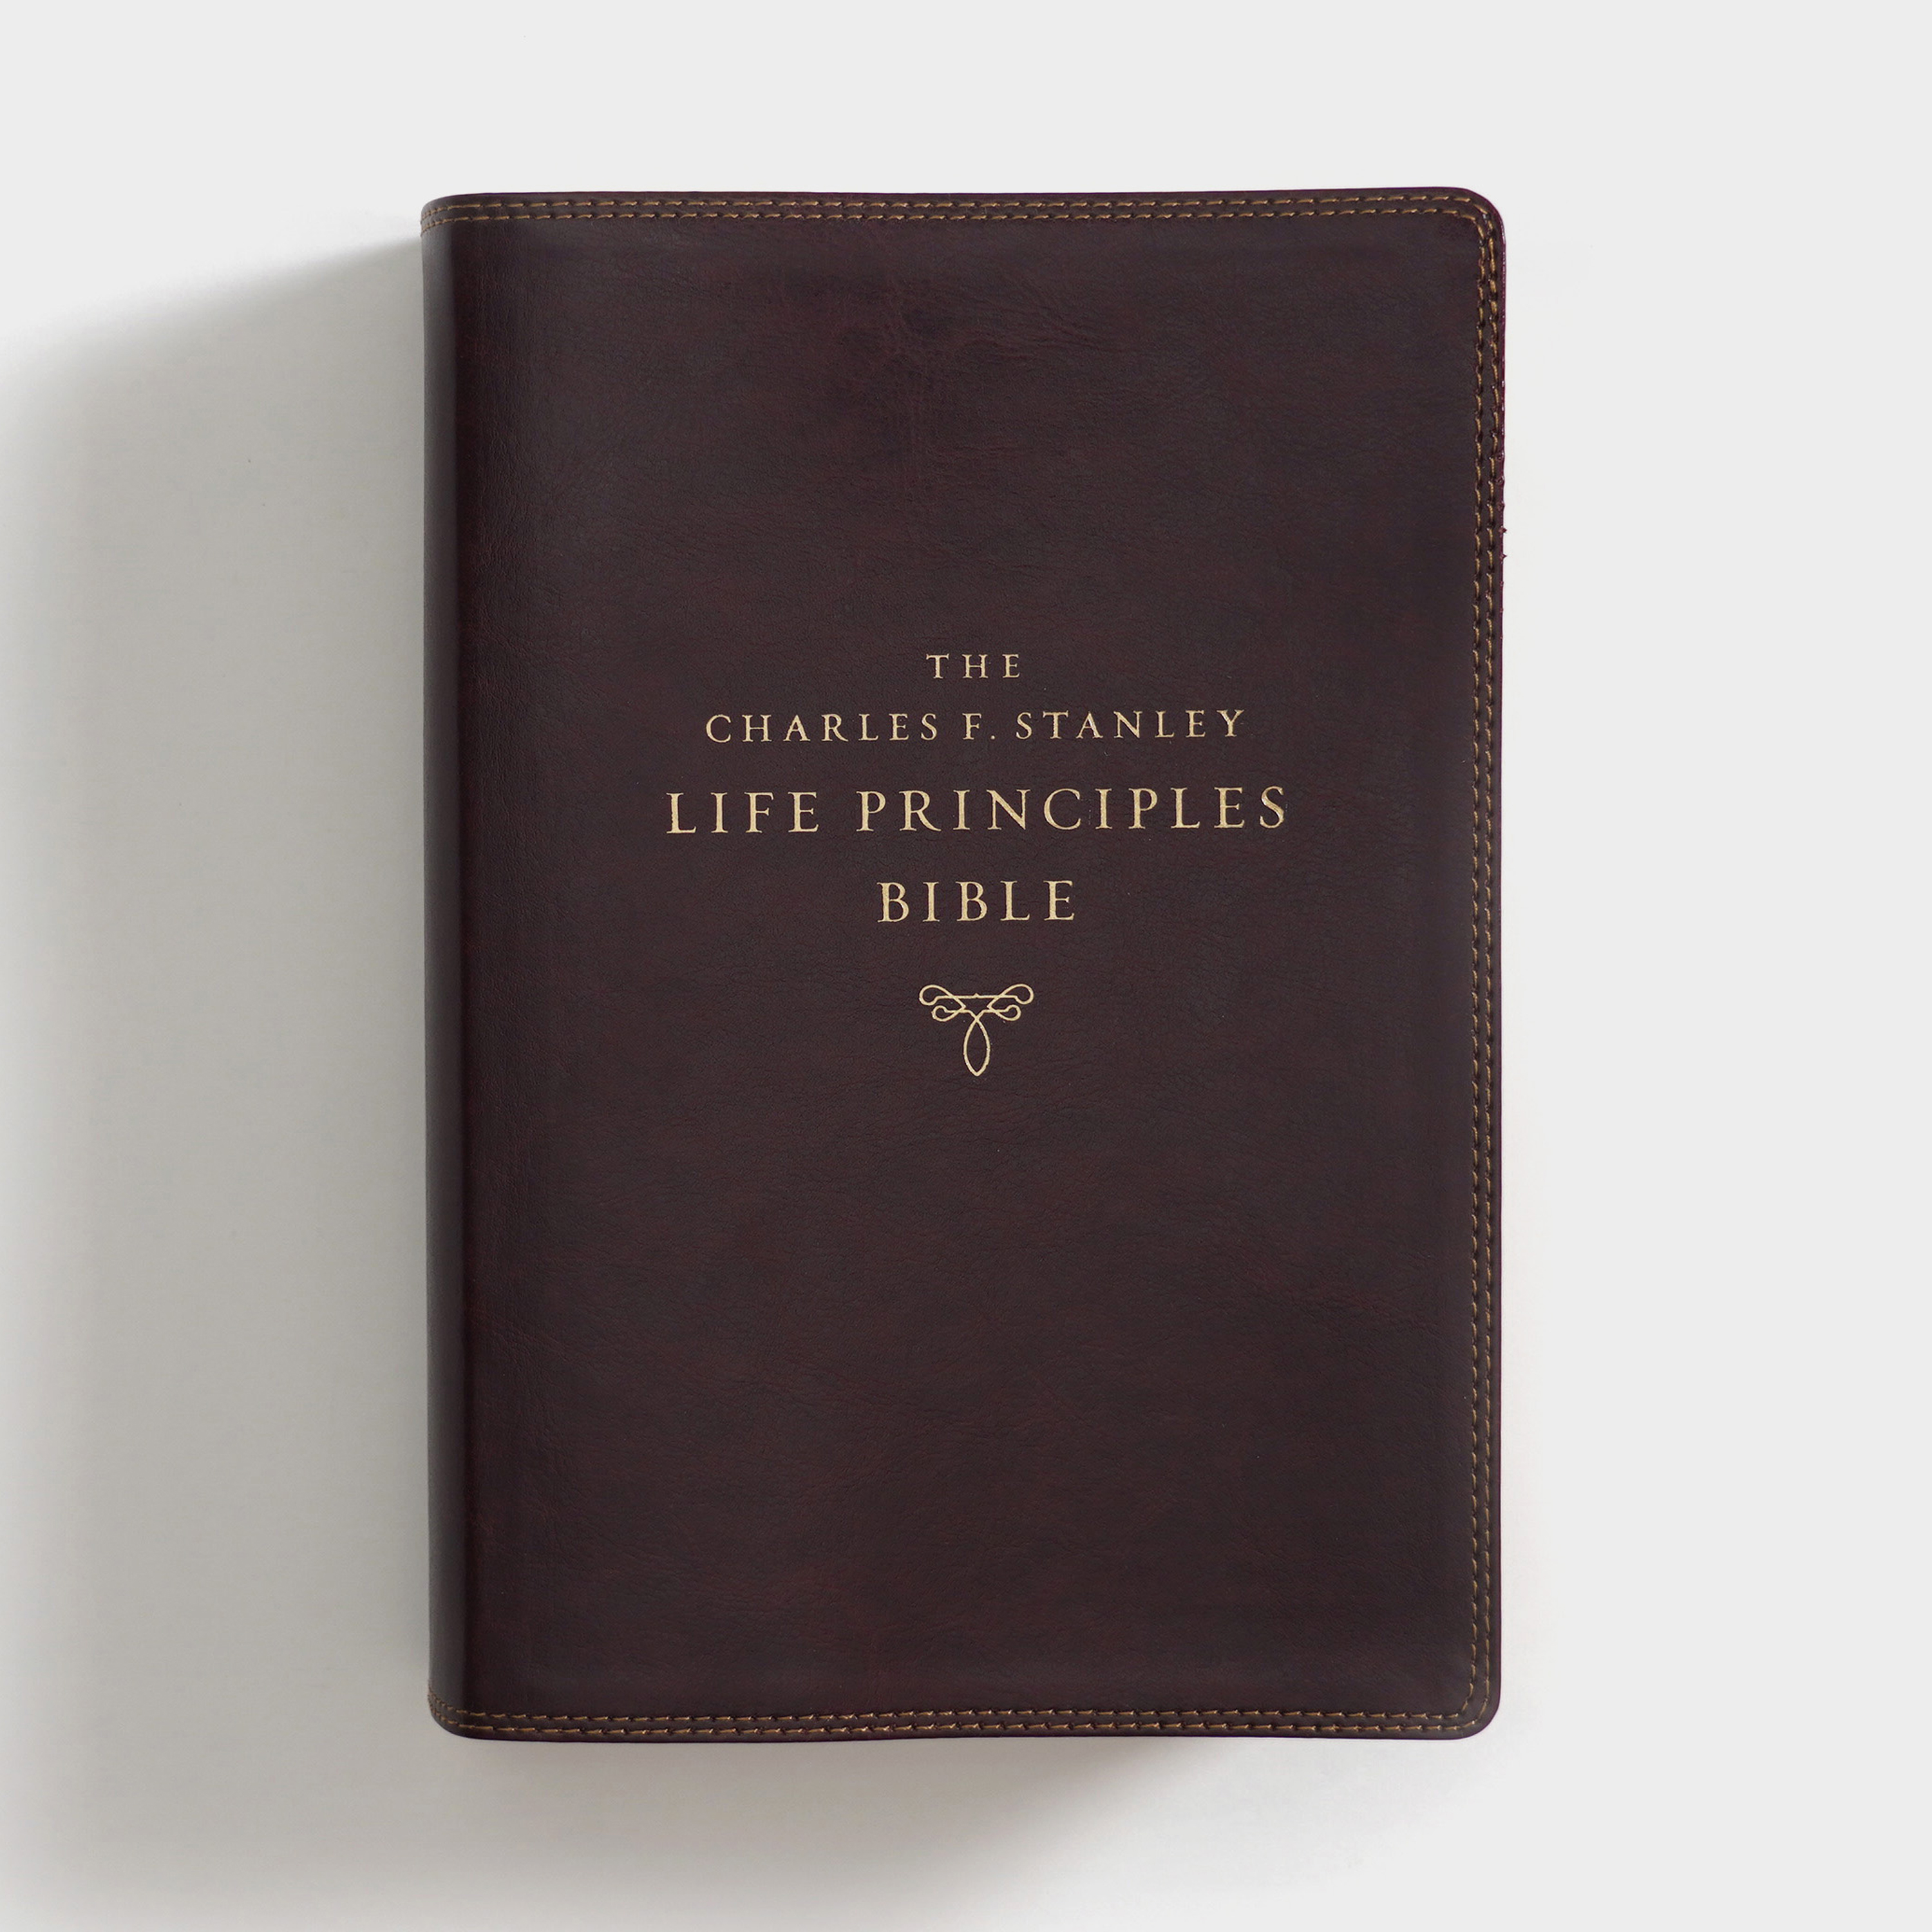 The Charles F. Stanley Life Principles Bible 2nd Edition, NKJV - Burgundy Leathersoft Indexed